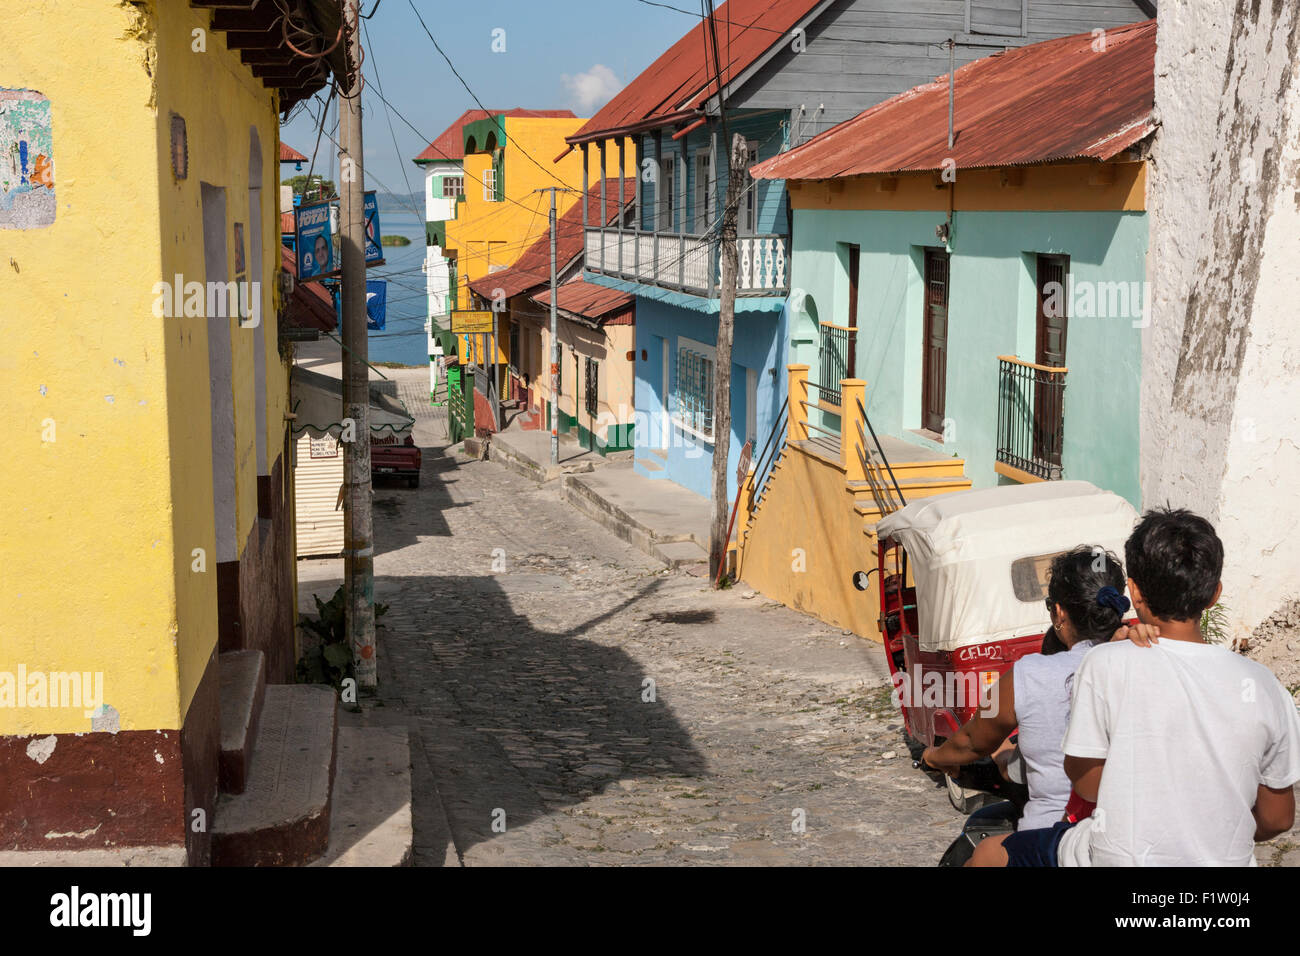 Motorcycle and jeep proceed down Calle de 10 Novembre past colorful houses in Flores, Guatemala. Lake Peten Itza visible beyond Stock Photo